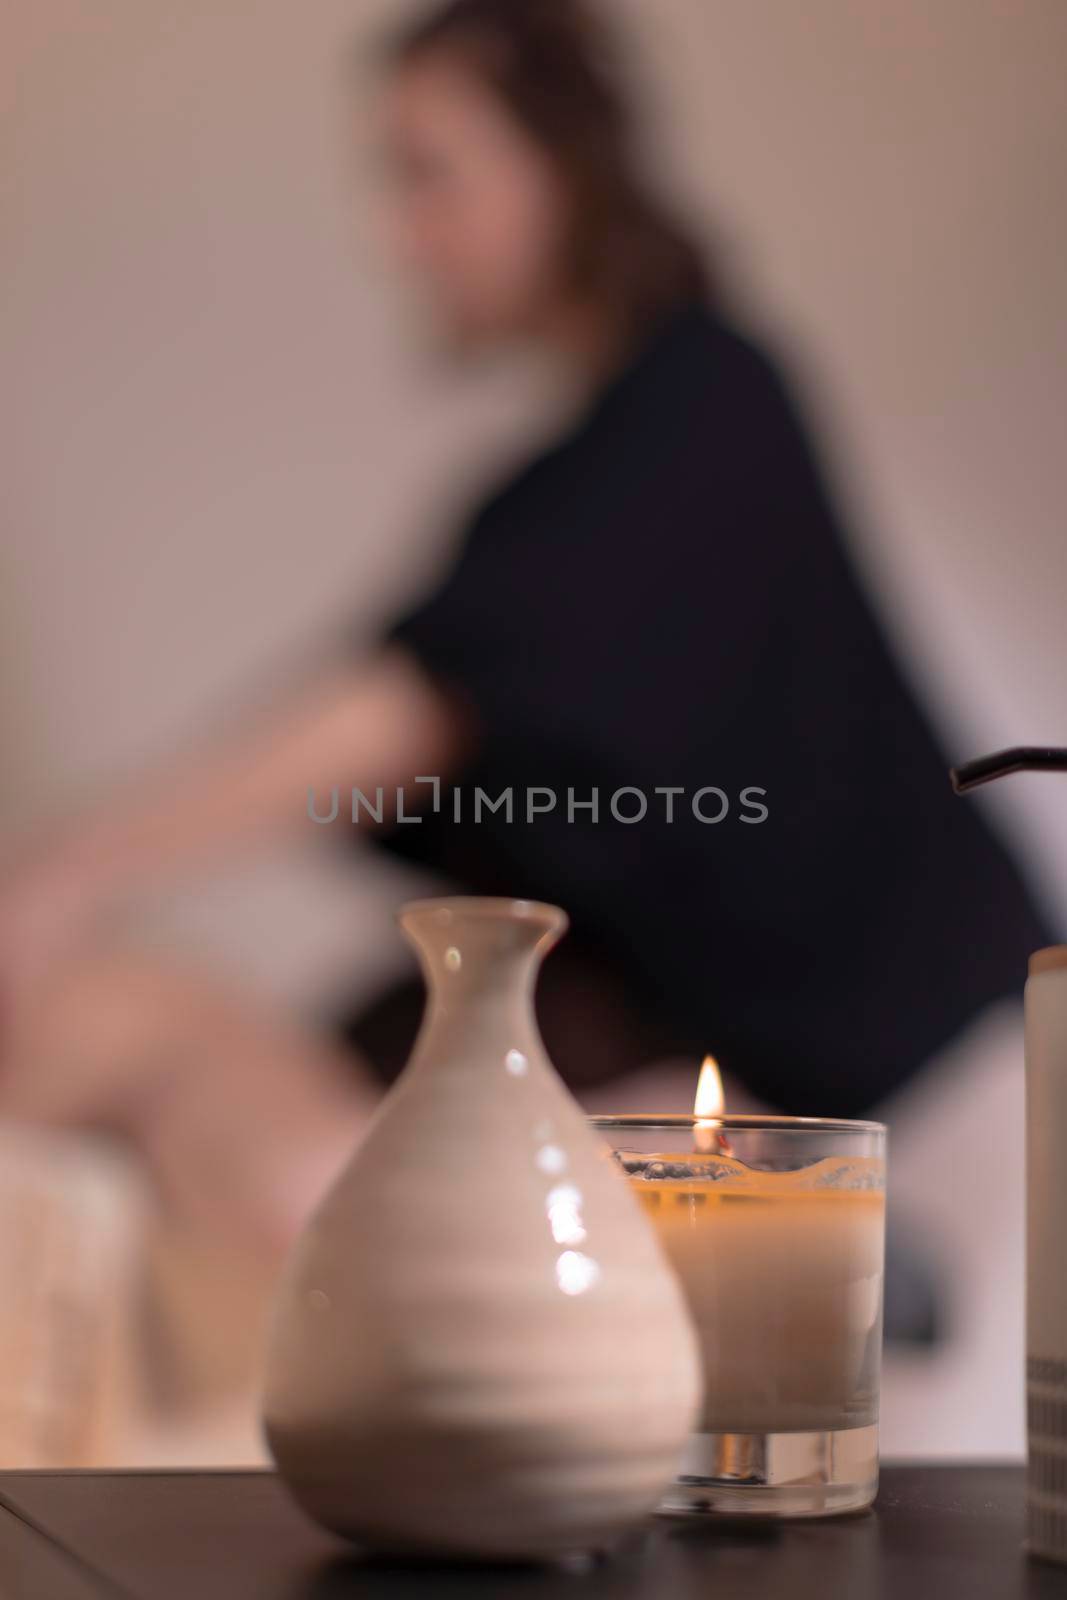 An aromatic candle dominates the scene while in the background a therapist massages her patient to relieve her muscle pain